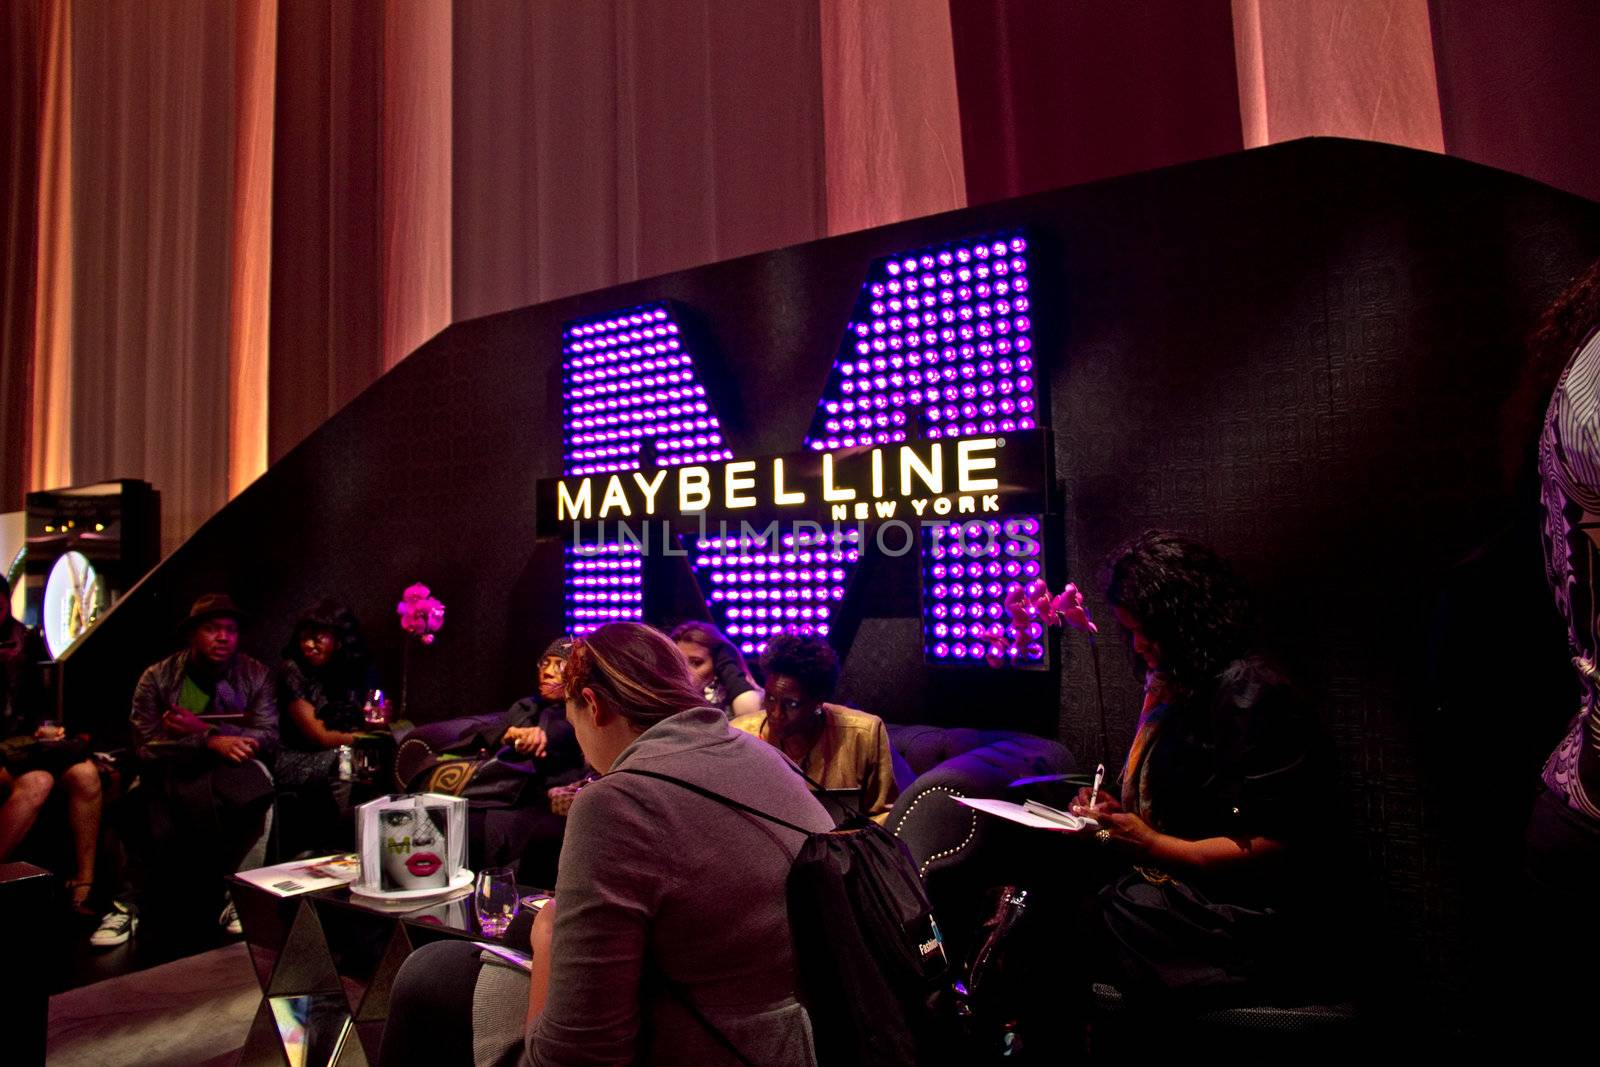 Maybelline Display at New York Fashion Week 2011 at Lincoln Center